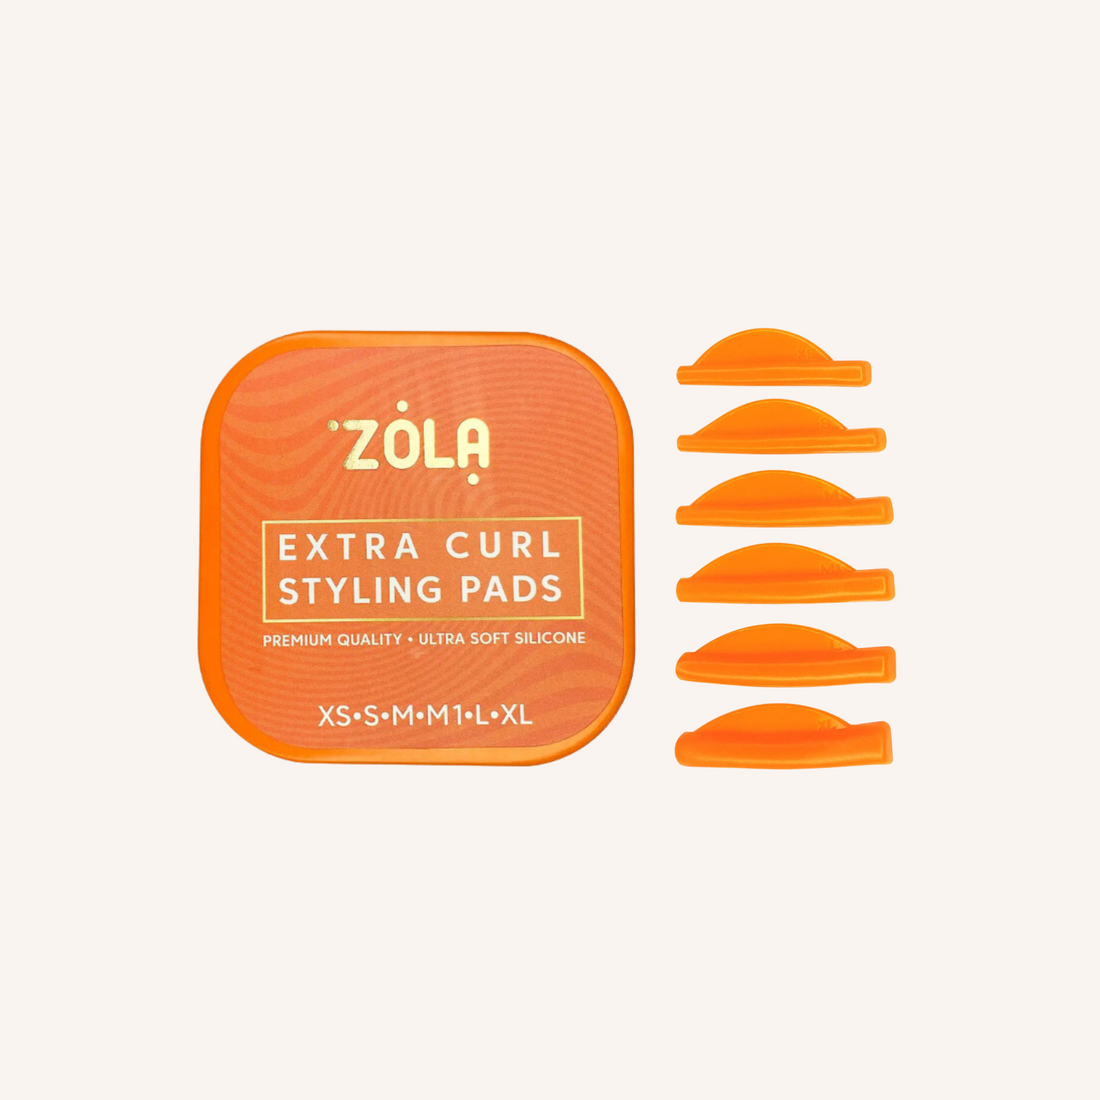 pads extra curl zola lexcillence